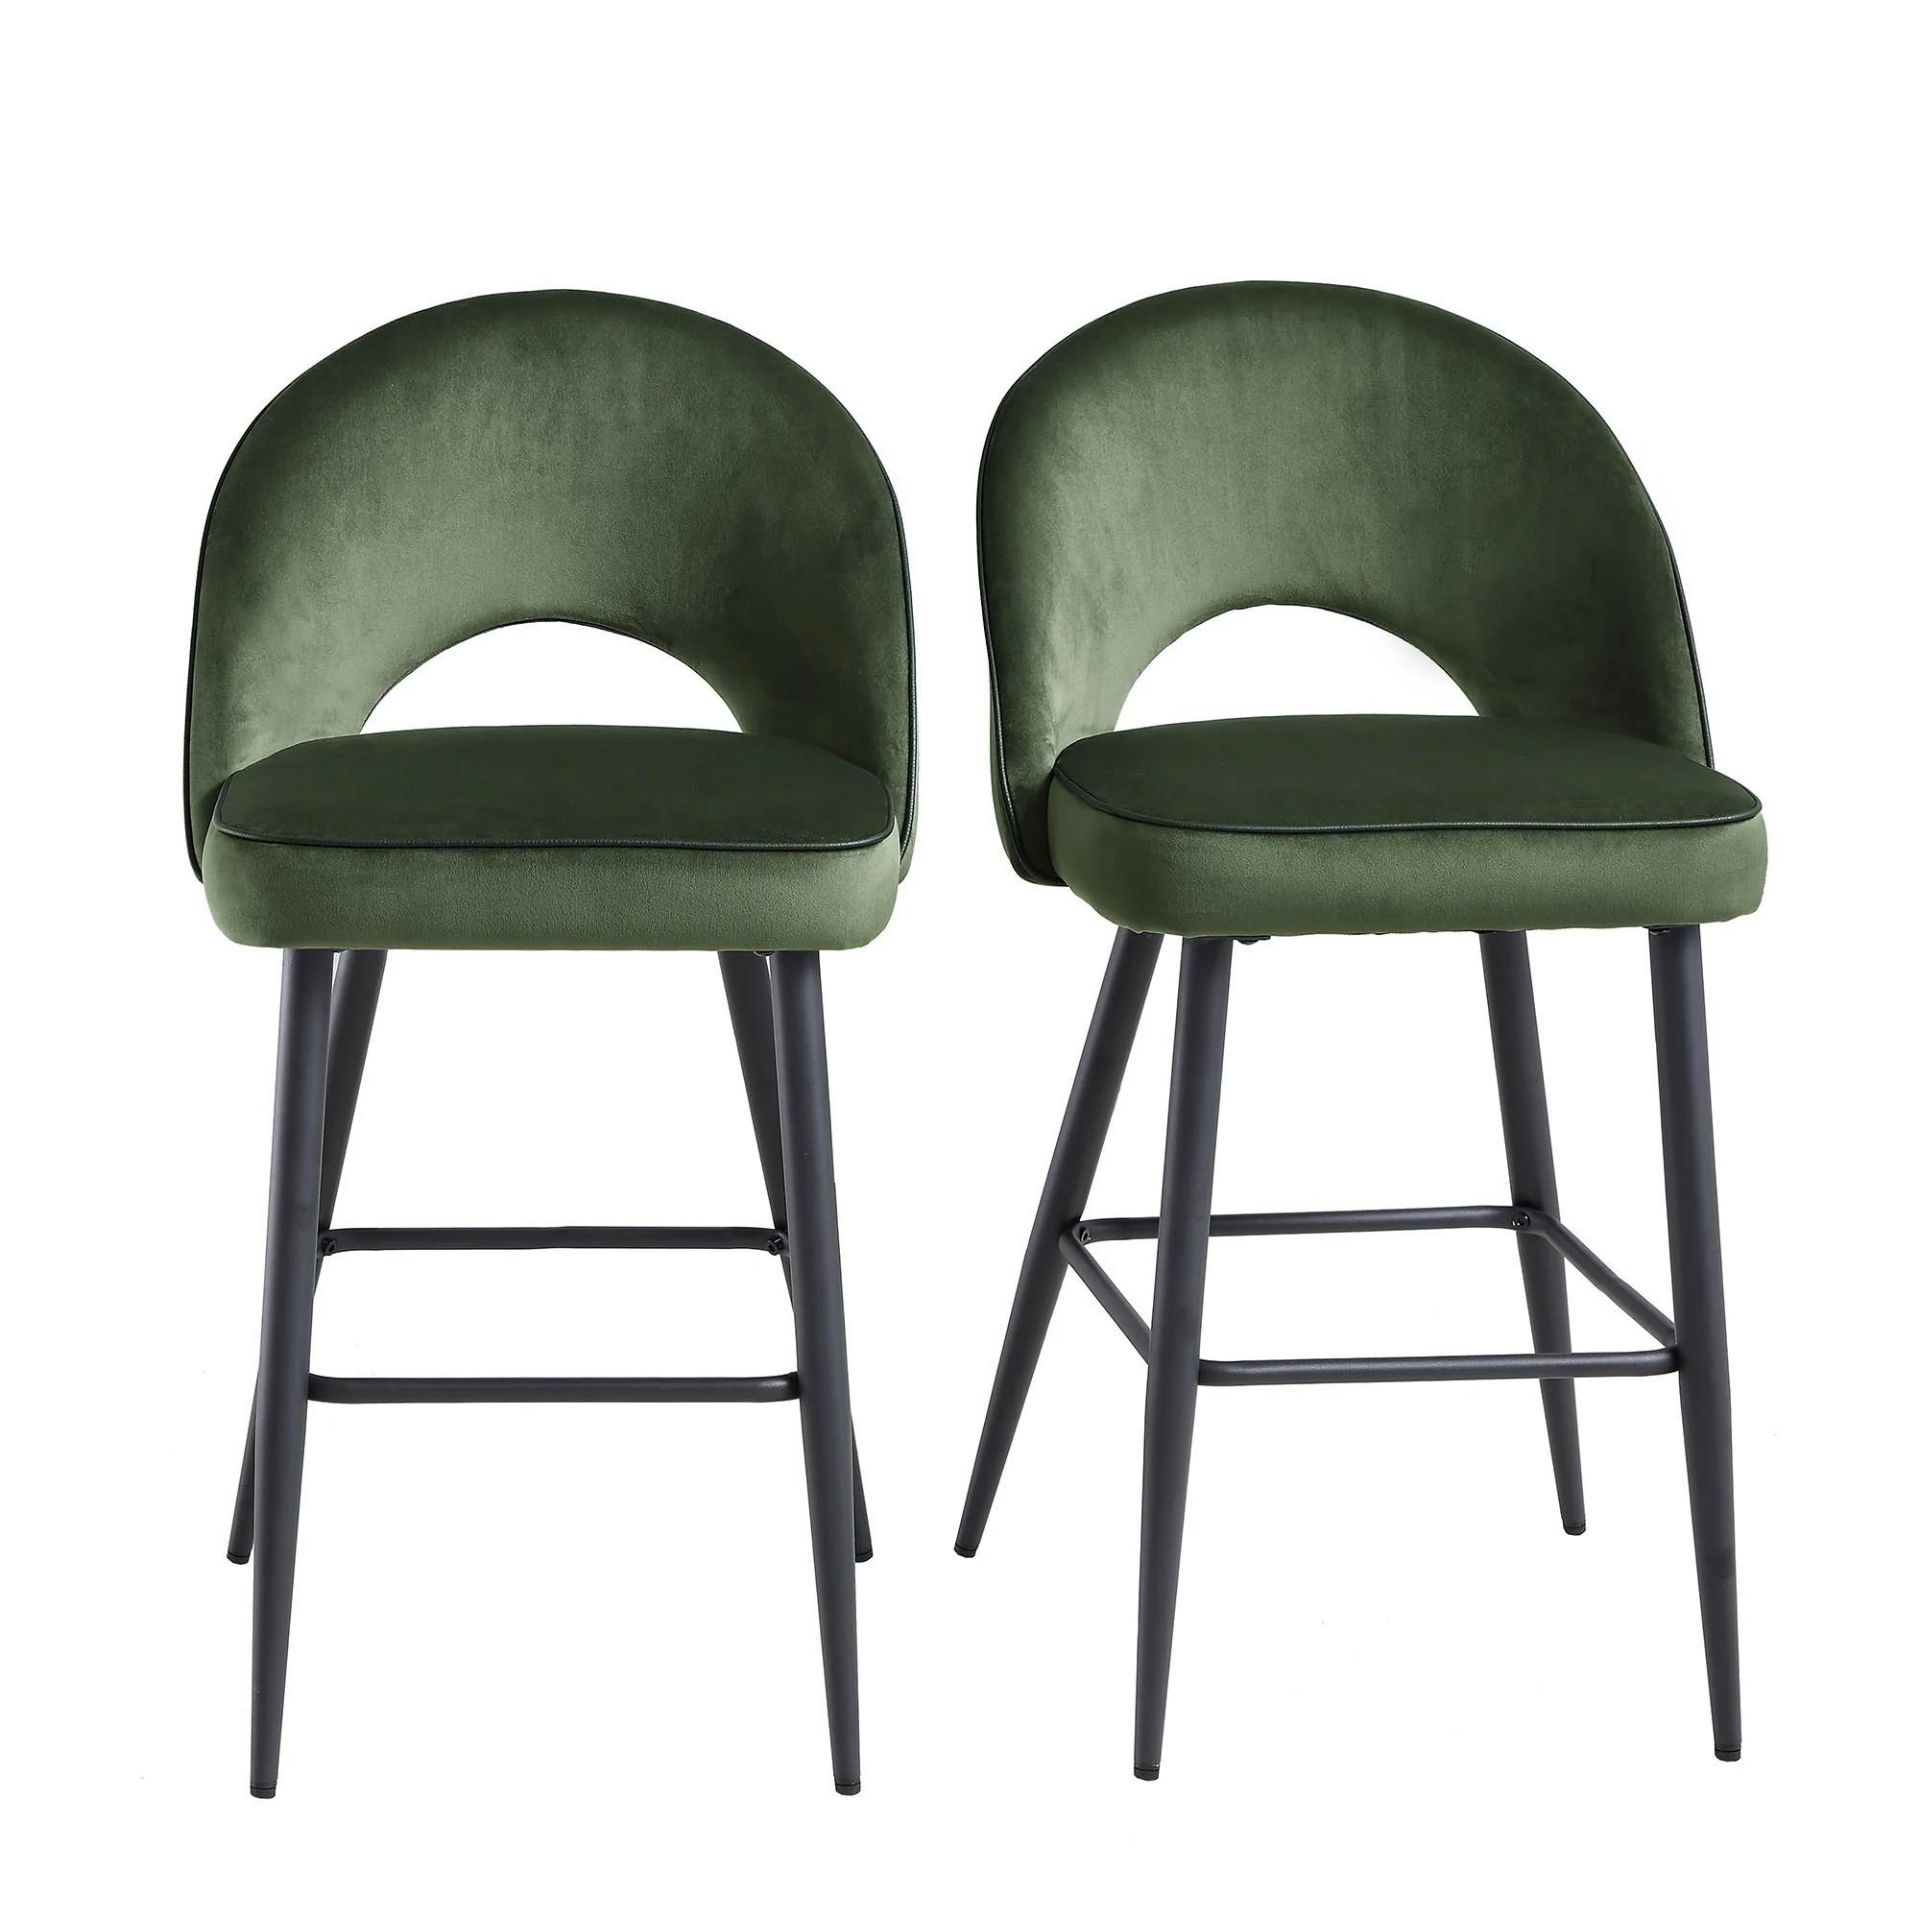 Oakley Set of 2 Dark Green Velvet Upholstered Counter Stools with Contrast Piping. - ER29. RRP £ - Image 4 of 4